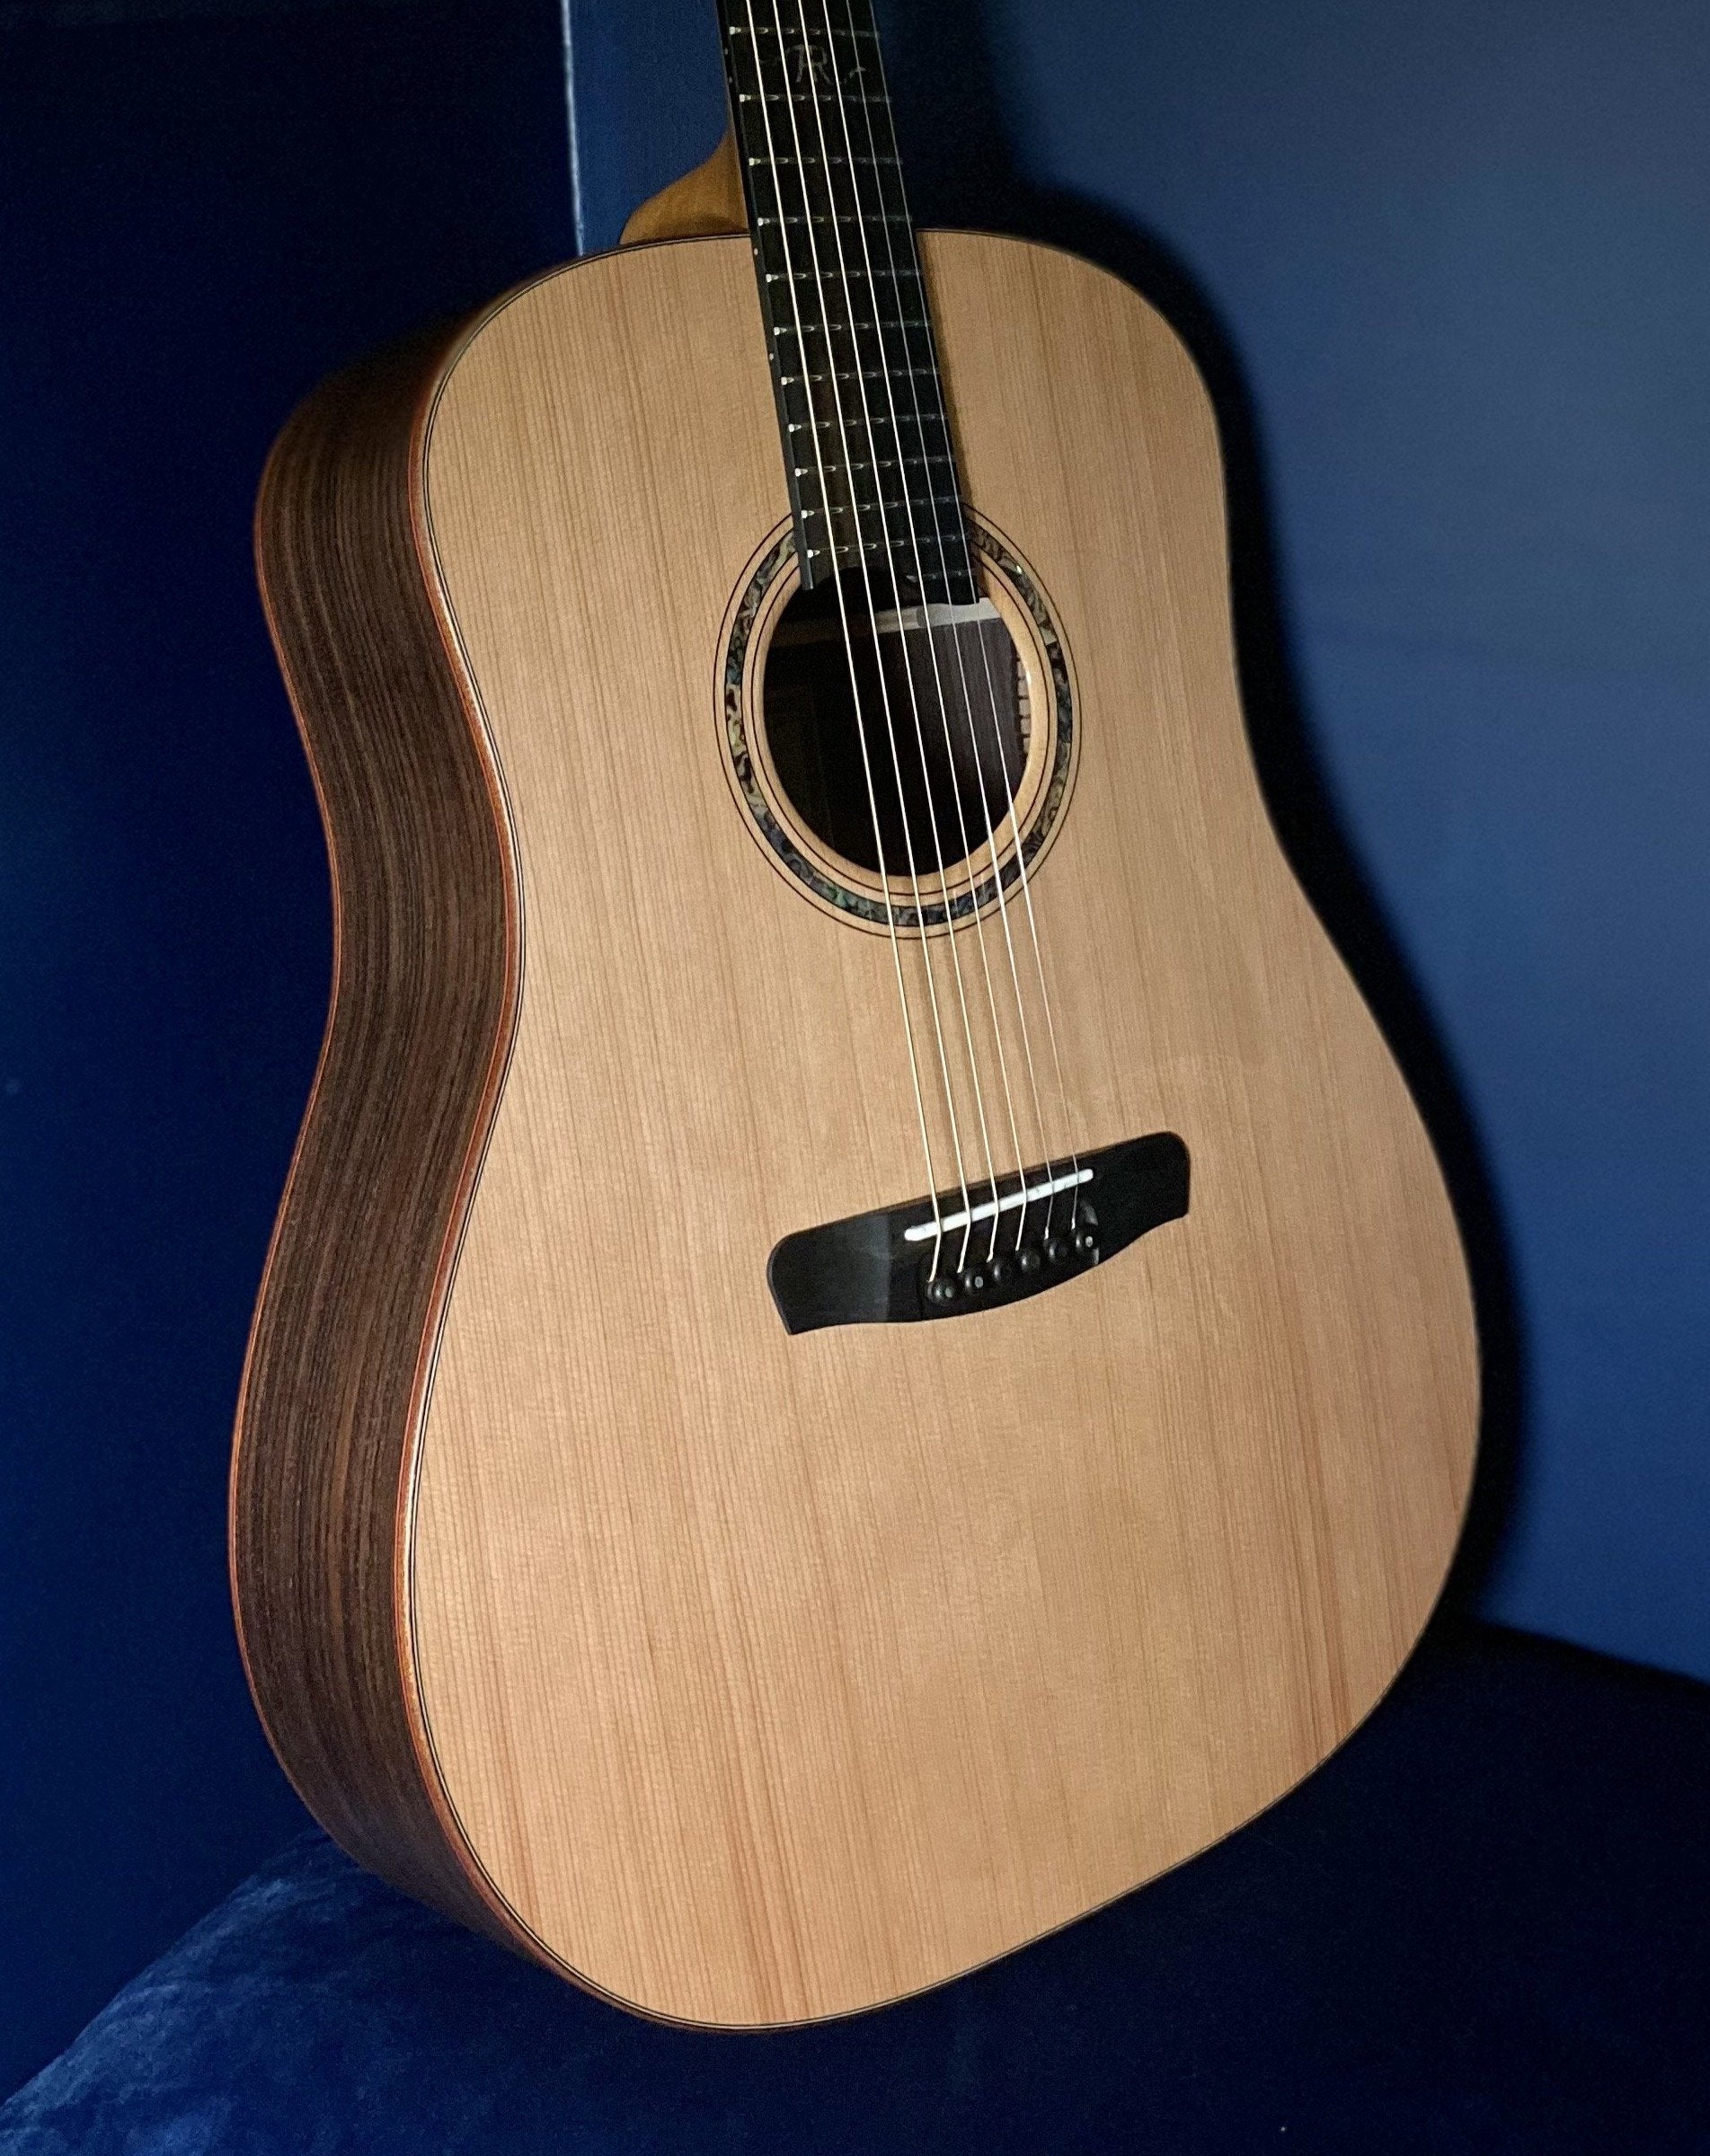 Dowina Rosewood / Maple / Rosewood Trio Plate (Amber Road) Dreadnought, Acoustic Guitar for sale at Richards Guitars.